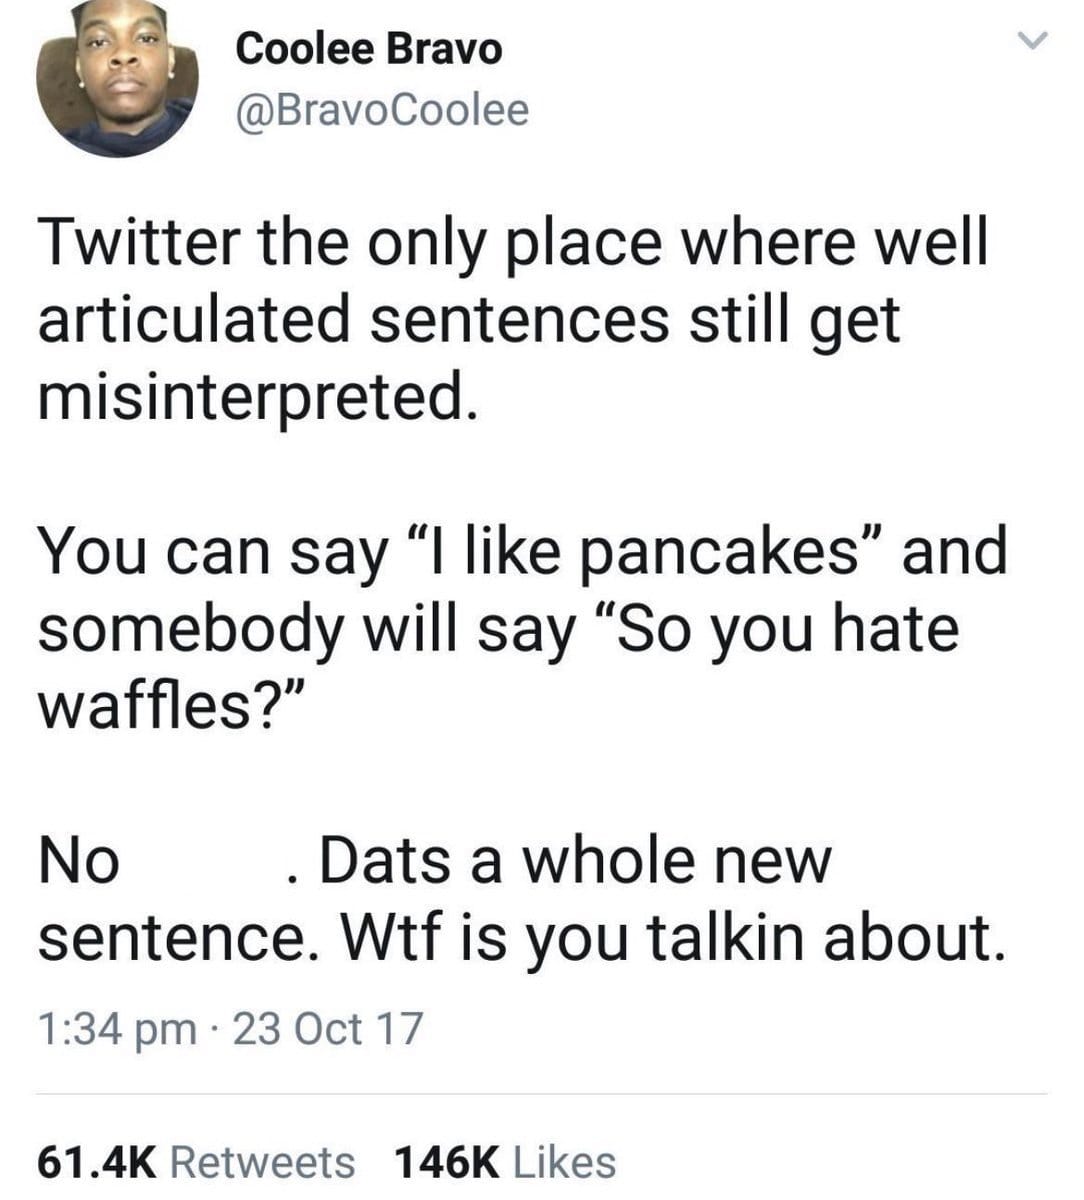 Tweet from @BravoCoolee saying, Twitter is the only place where well articulated sentences still get misinterpreted. You can say "I like pancakes" and somebody will say "So you hate waffles?" No. Dats a while new sentence. Wtf is you talking aobut.